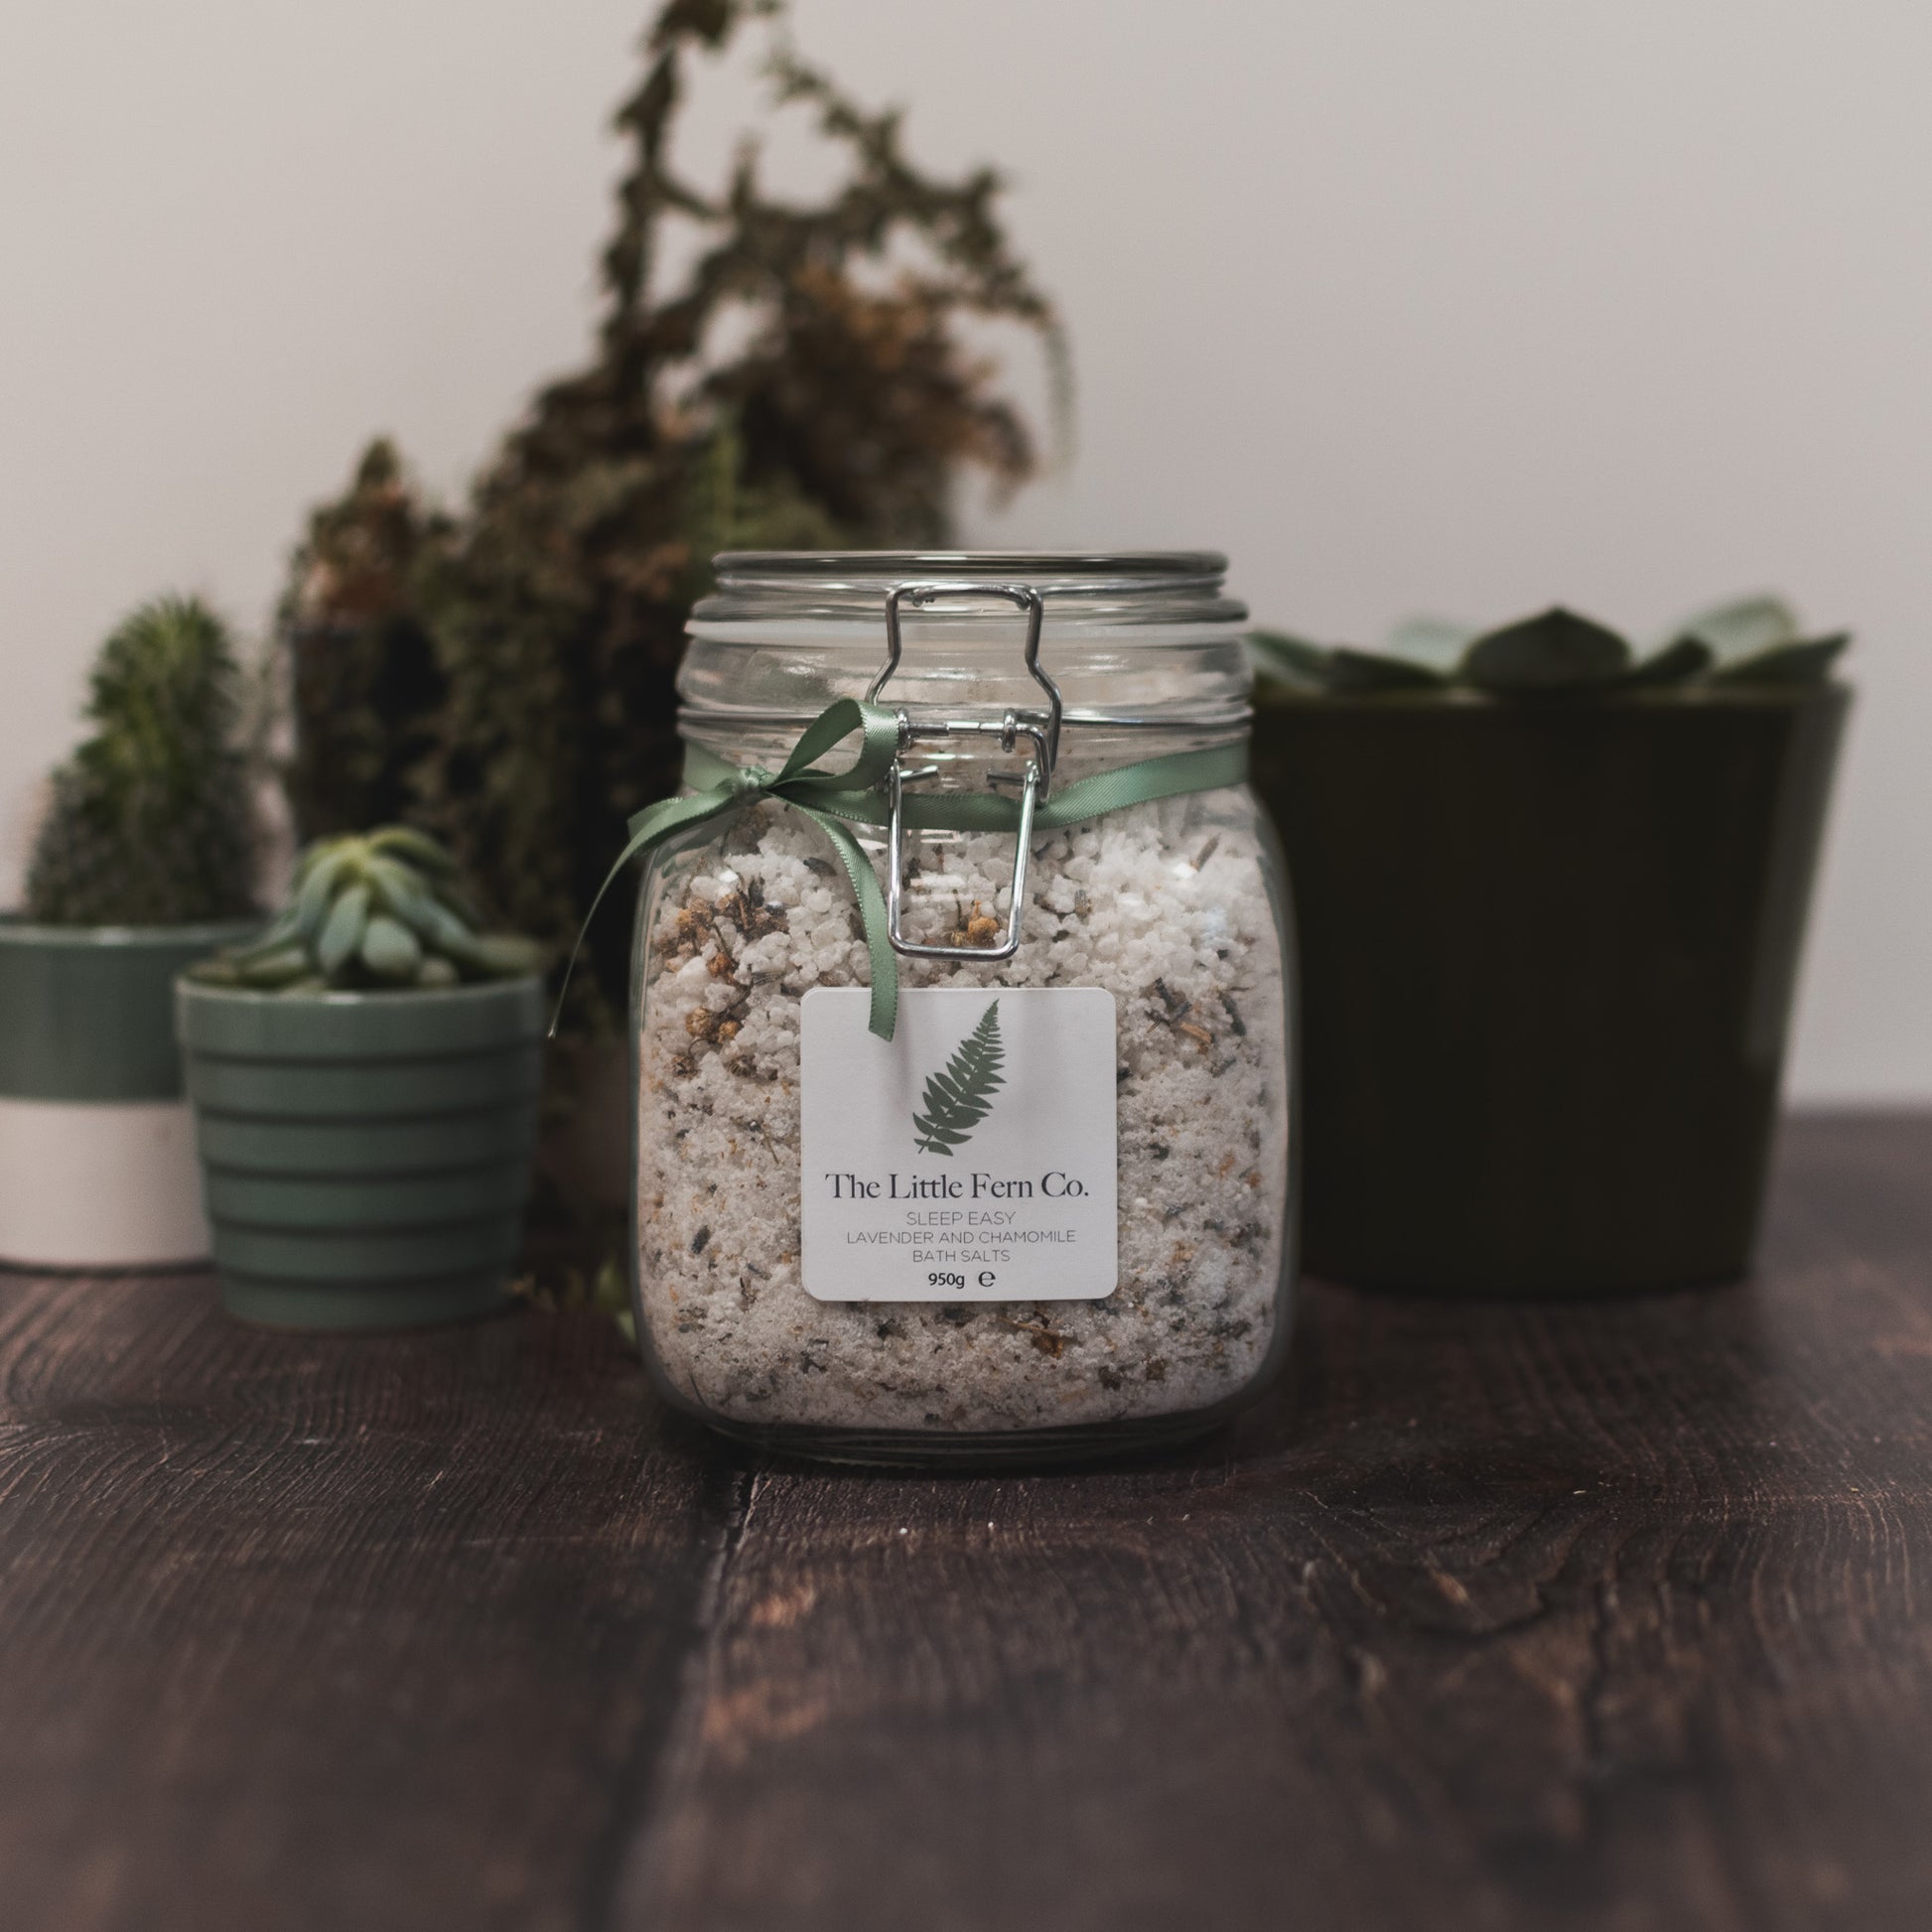 Lavender and Chamomile Luxury Bath Salts Form The Little Fern Co